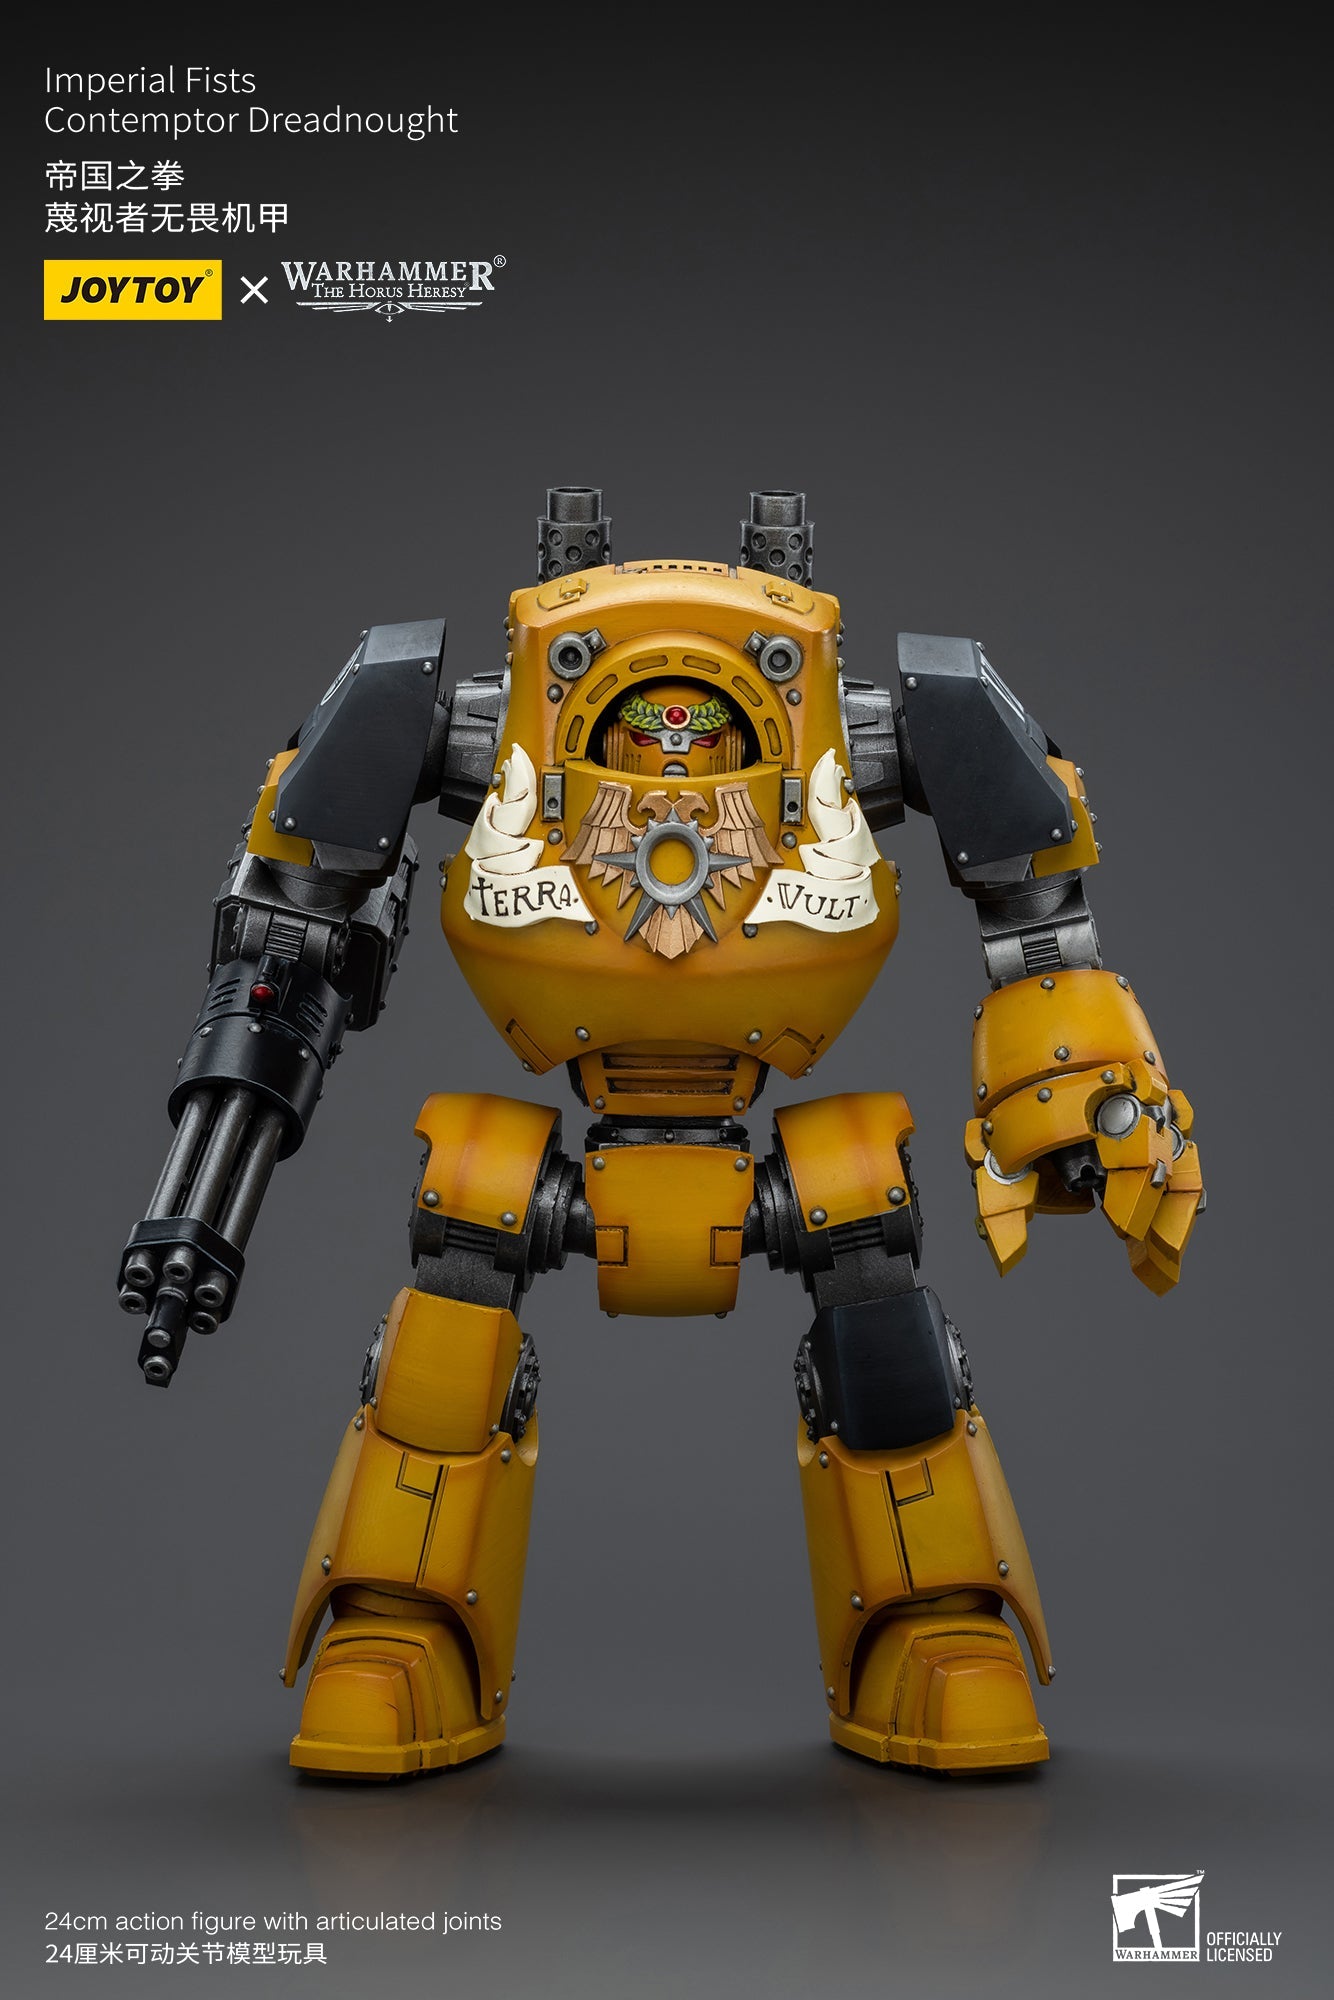 Imperial Fists Contemptor Dreadnought- Warhammer "The Horus Heresy" Action Figure By JOYTOY